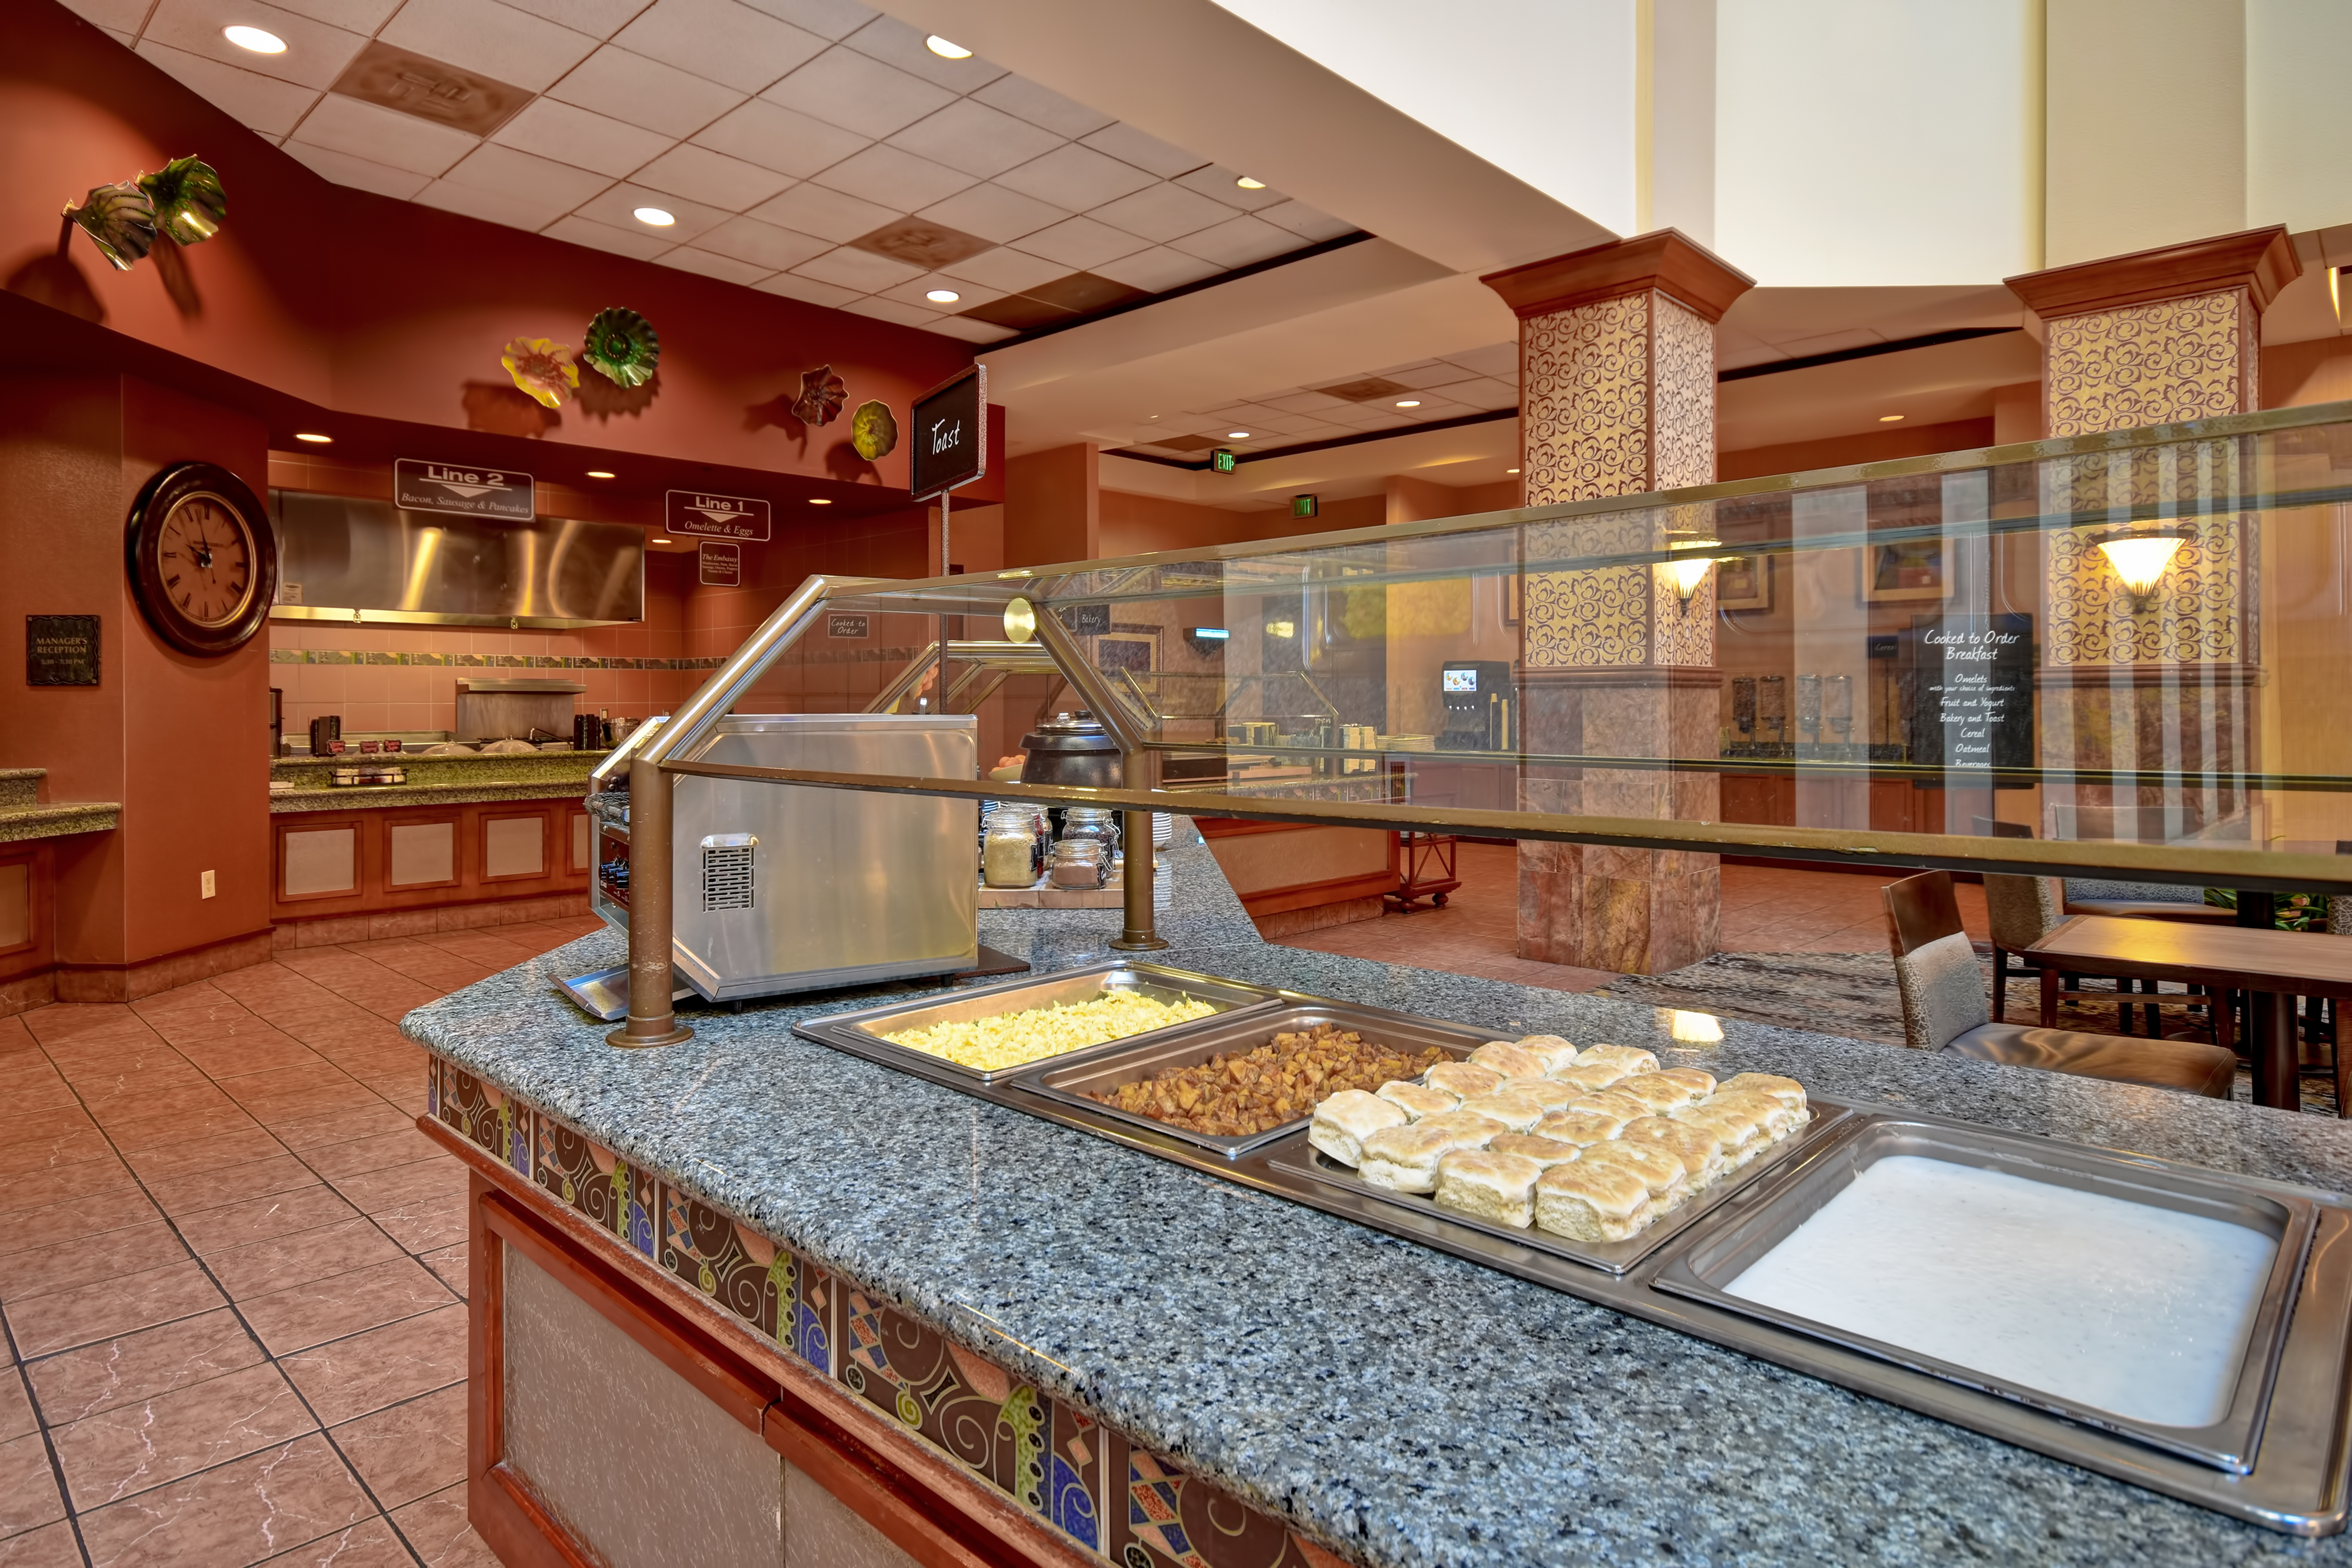 Breakfast Bar Area with Hot Foods